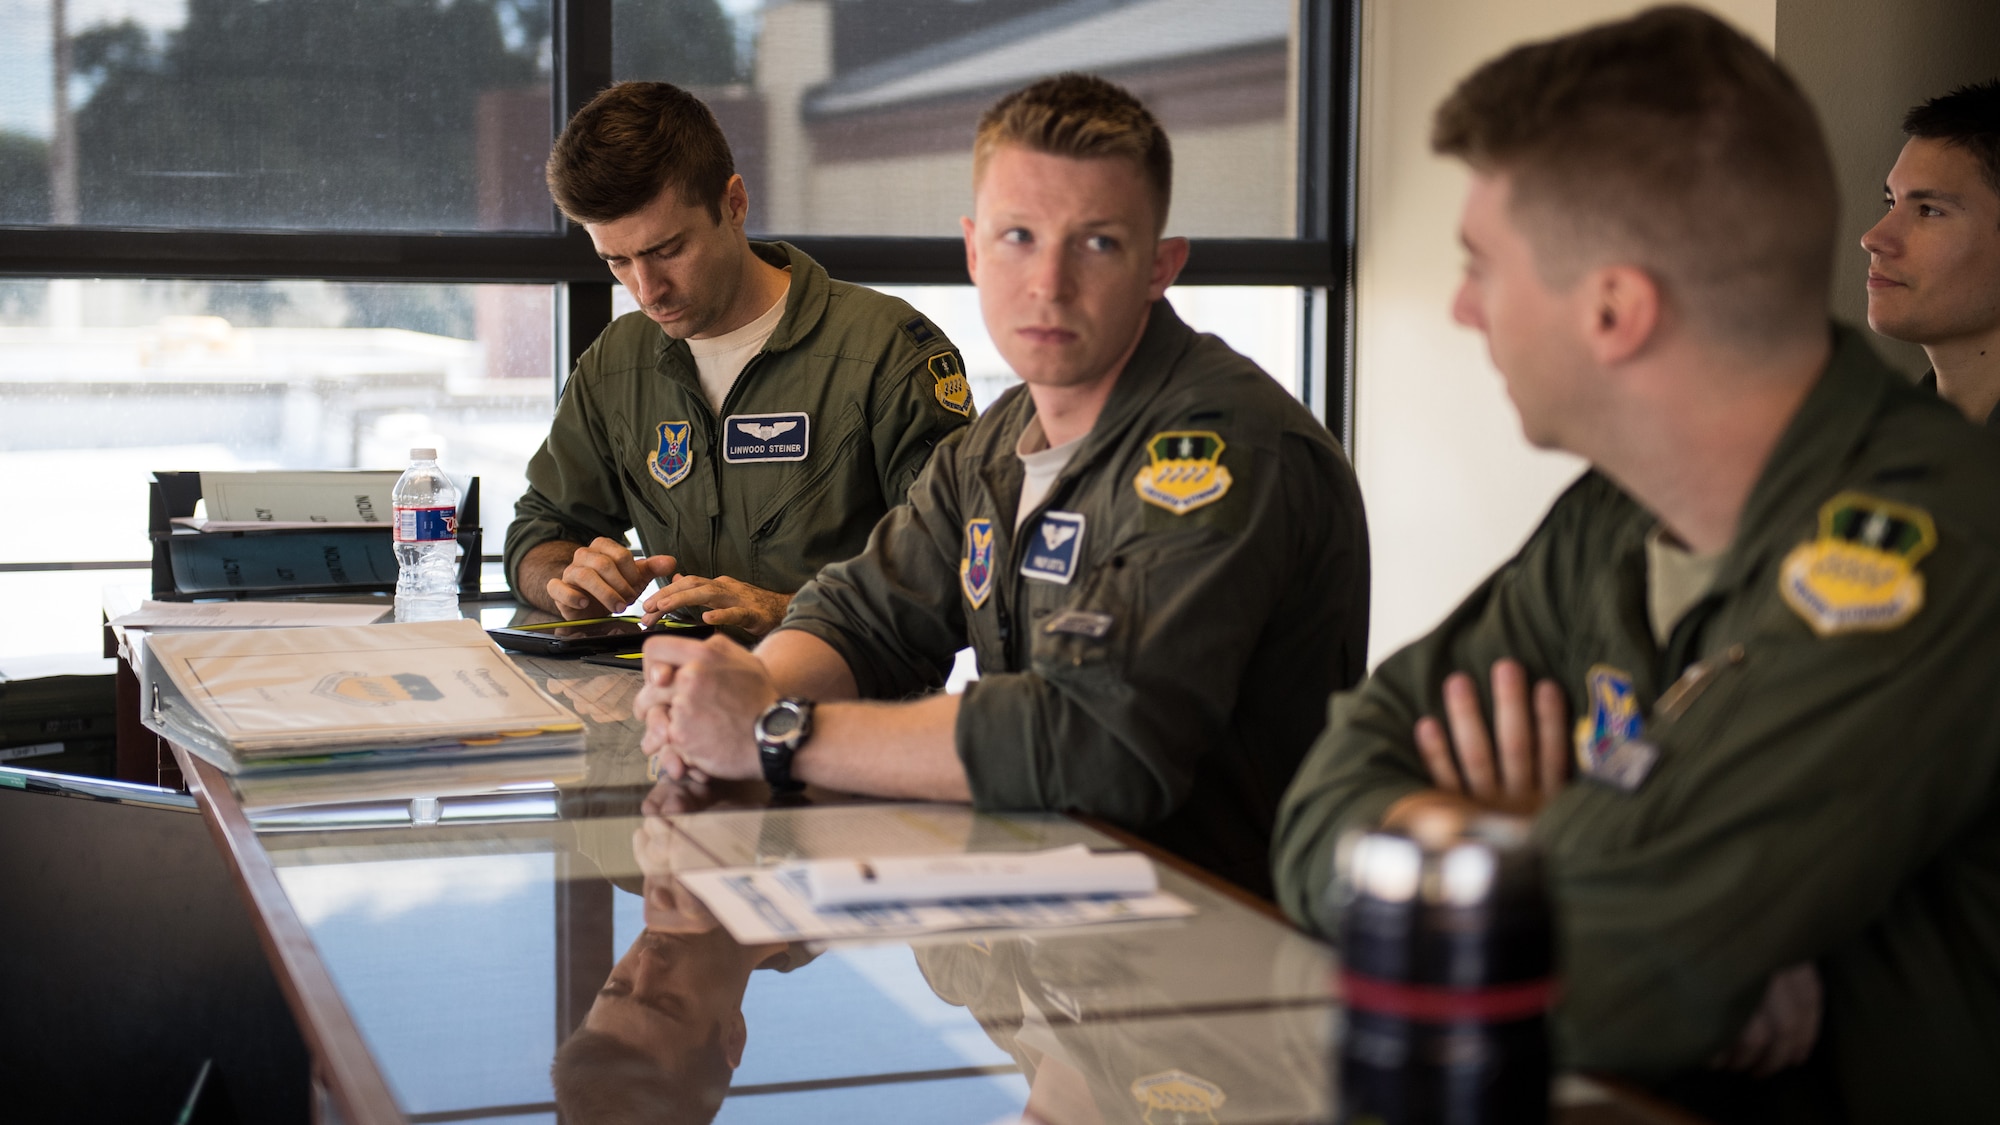 Barksdale aircrew prepare for a weather brief at Barksdale Air Force Base La., Oct. 10, 2018. The 2nd Operations Support Squadron weather flight briefed approximately 1,200 crews throughout 2017 on the forecast and the impact it would have on their flight. (U.S. Air Force photo by Airman 1st Class Lillian Miller)